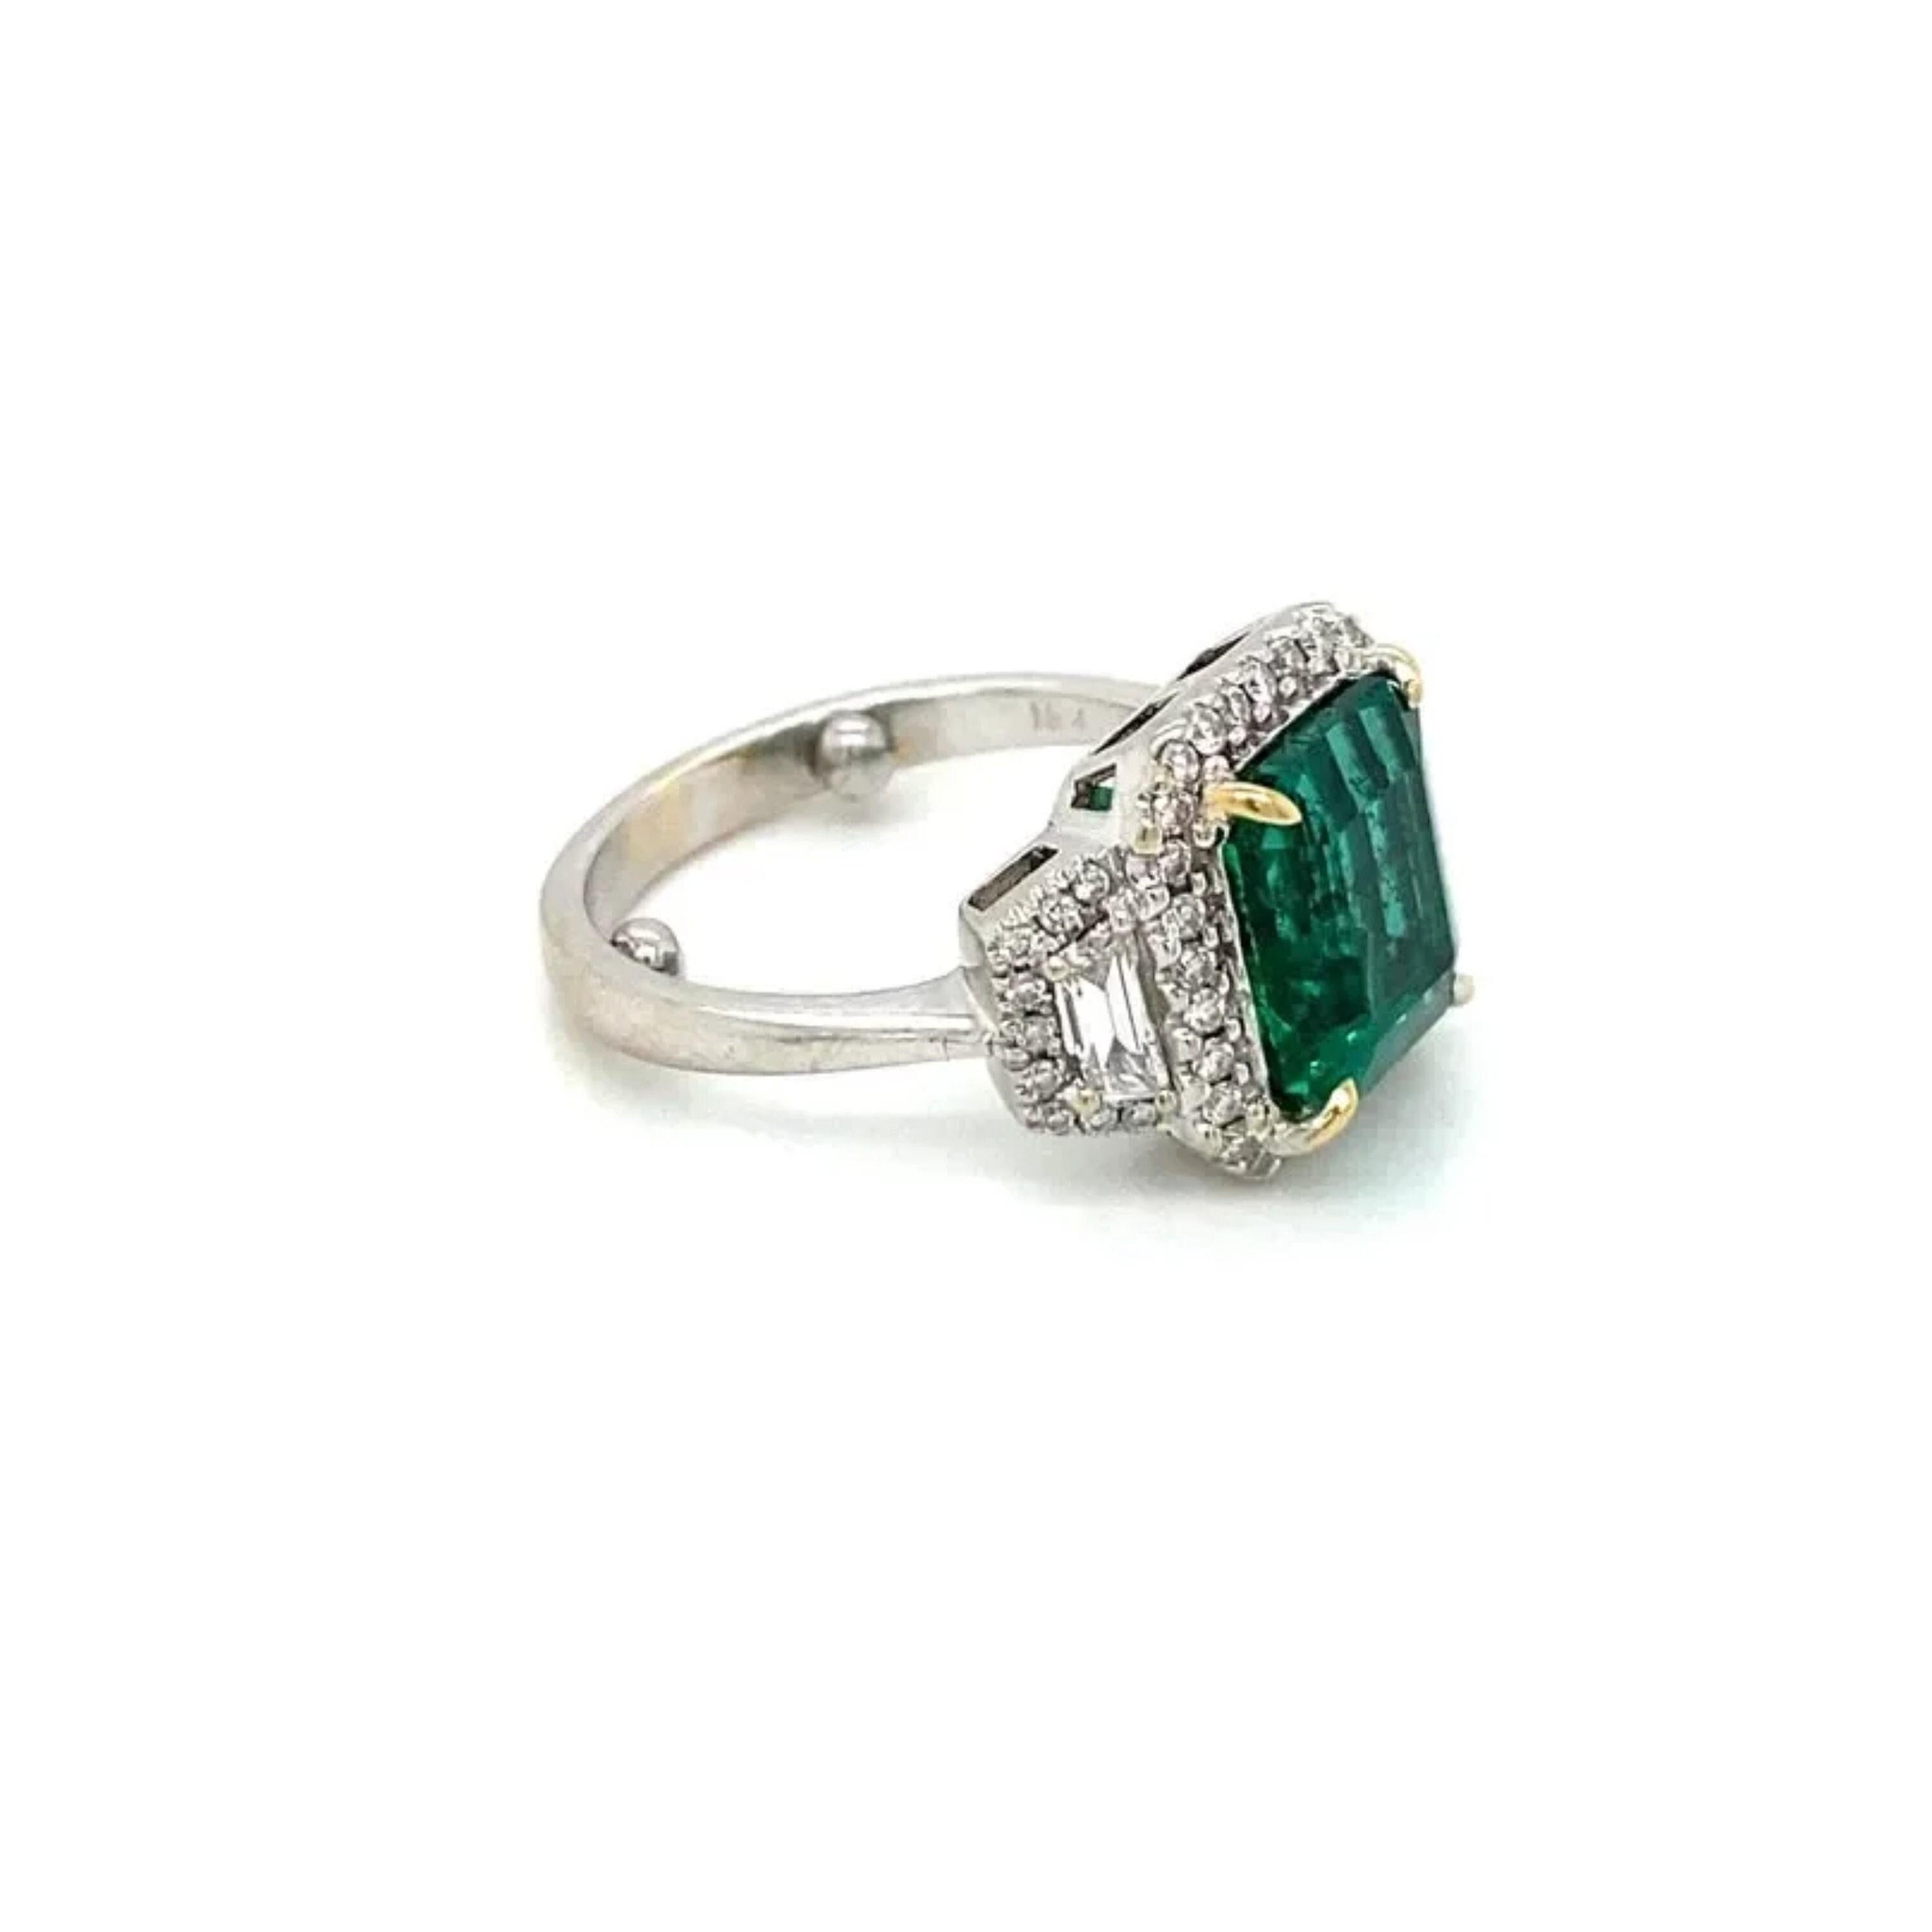 For Sale:  Emerald Engagement Ring, Emerald Cut Emerald Wedding Ring 4